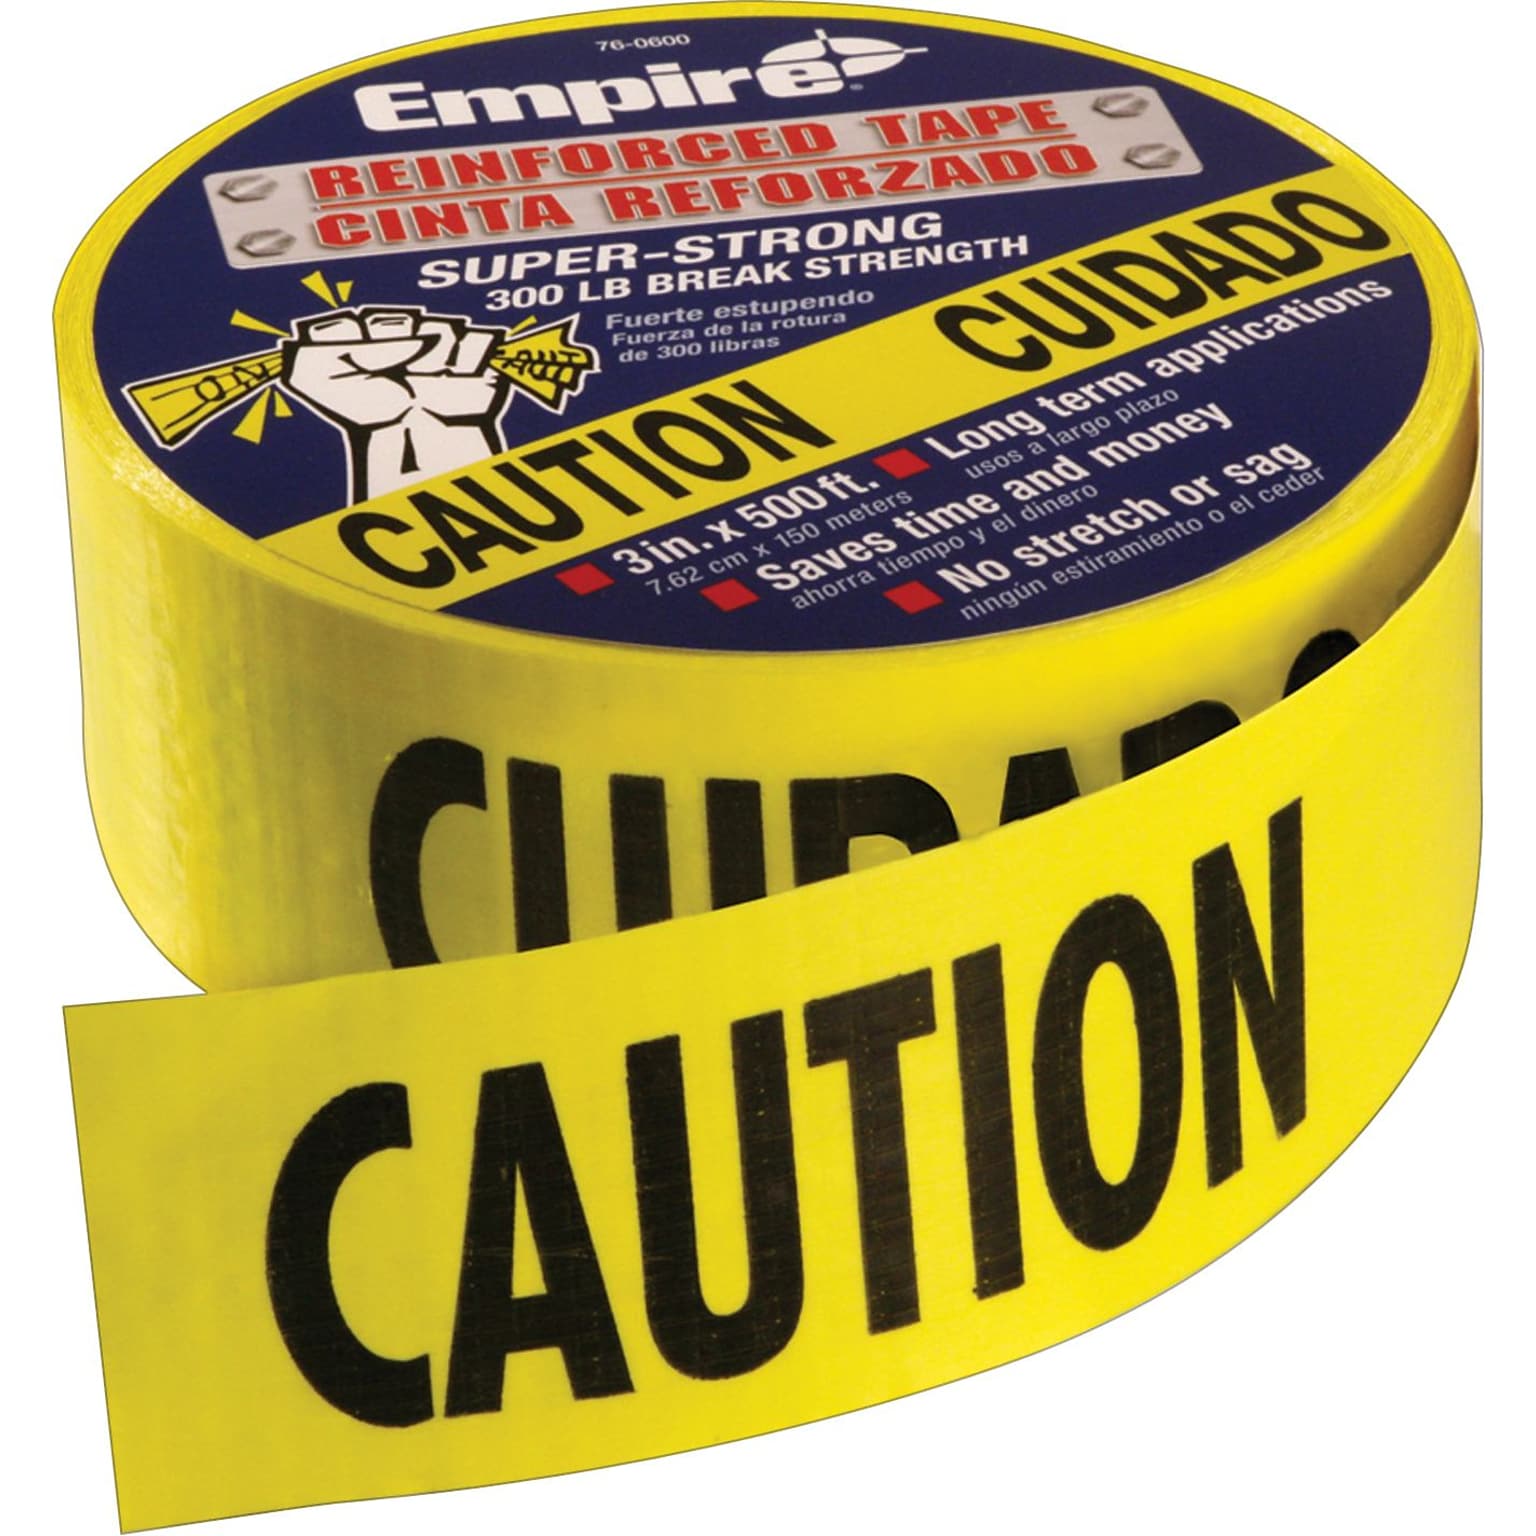 Empire Level Safety Barricade Tapes, Yellow, Caution, 1000 Length, 3 Mil Thickness (272-77-1001)